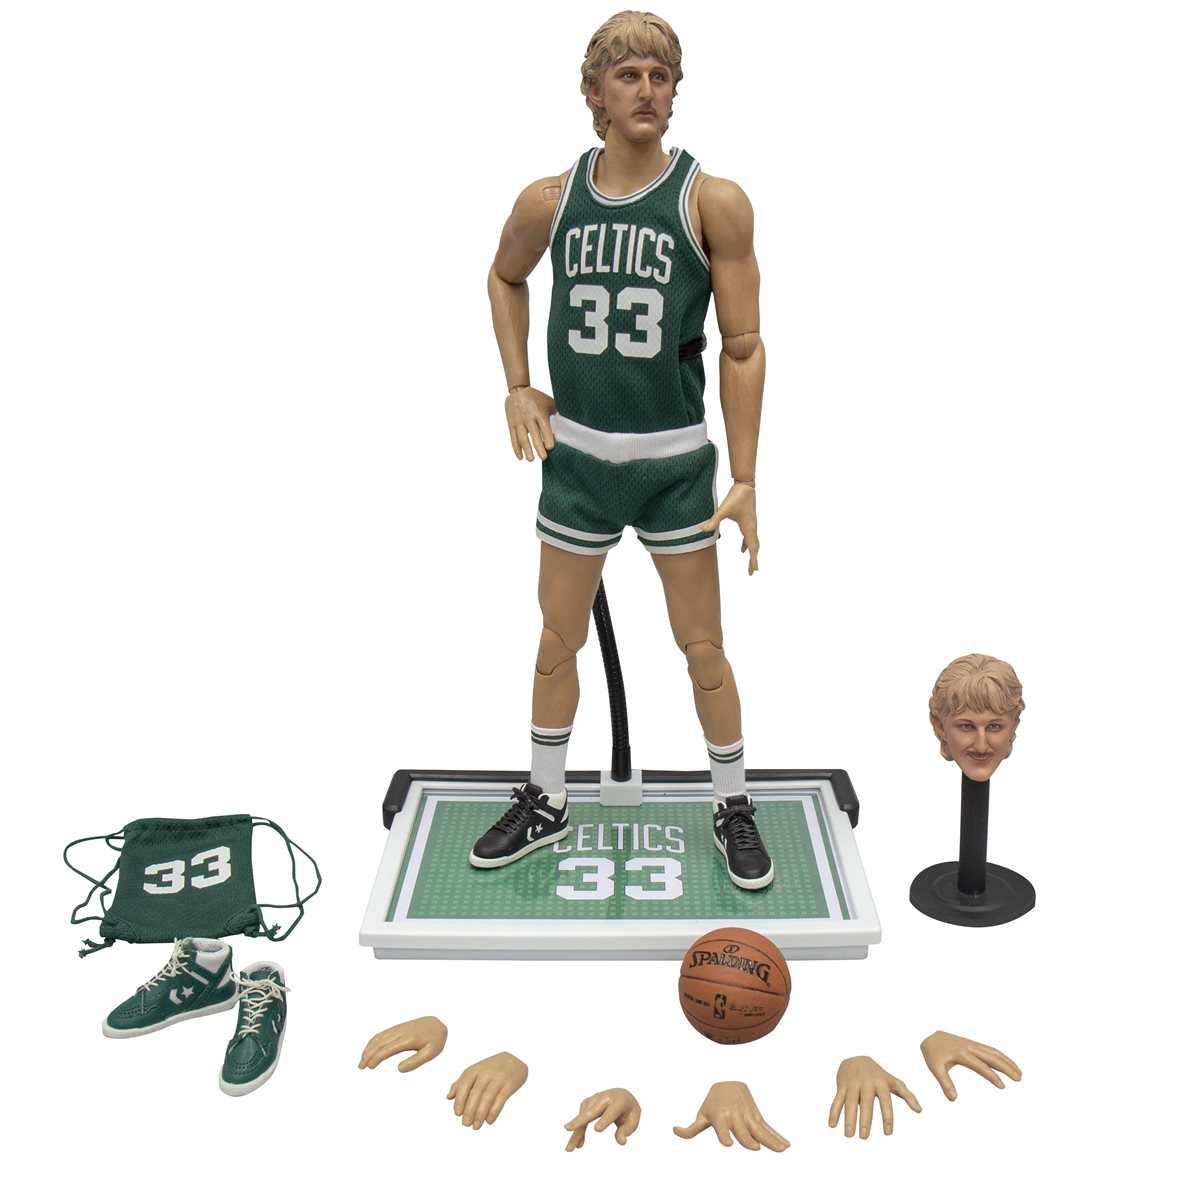 Boston Celtics forward Larry Bird is a player for the ages